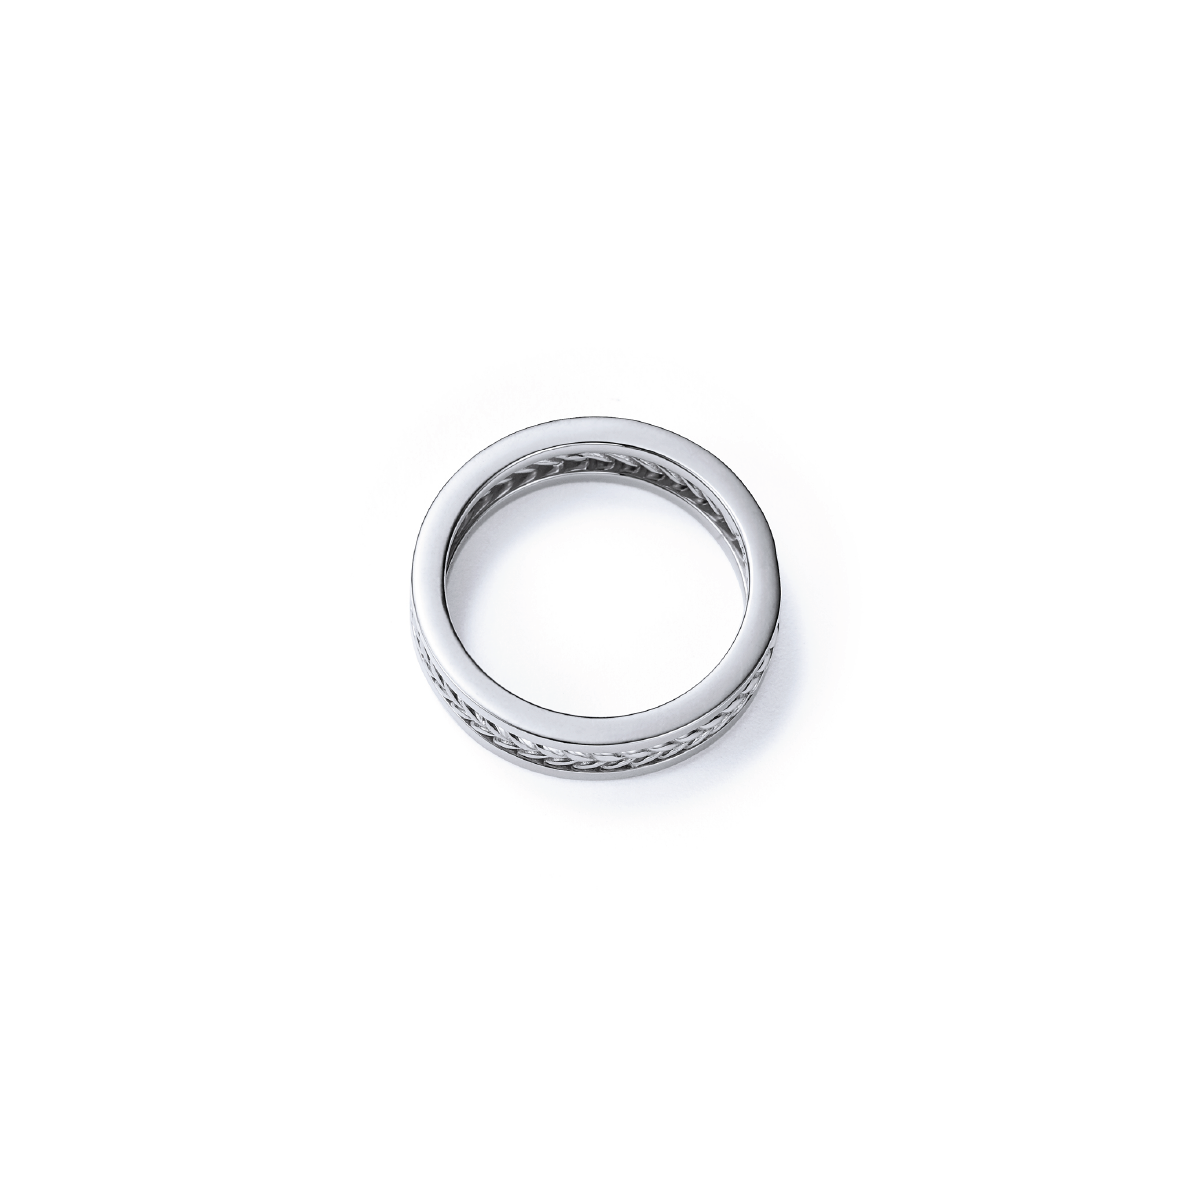 Eco-Friendly White Gold Wedding Band - Top View